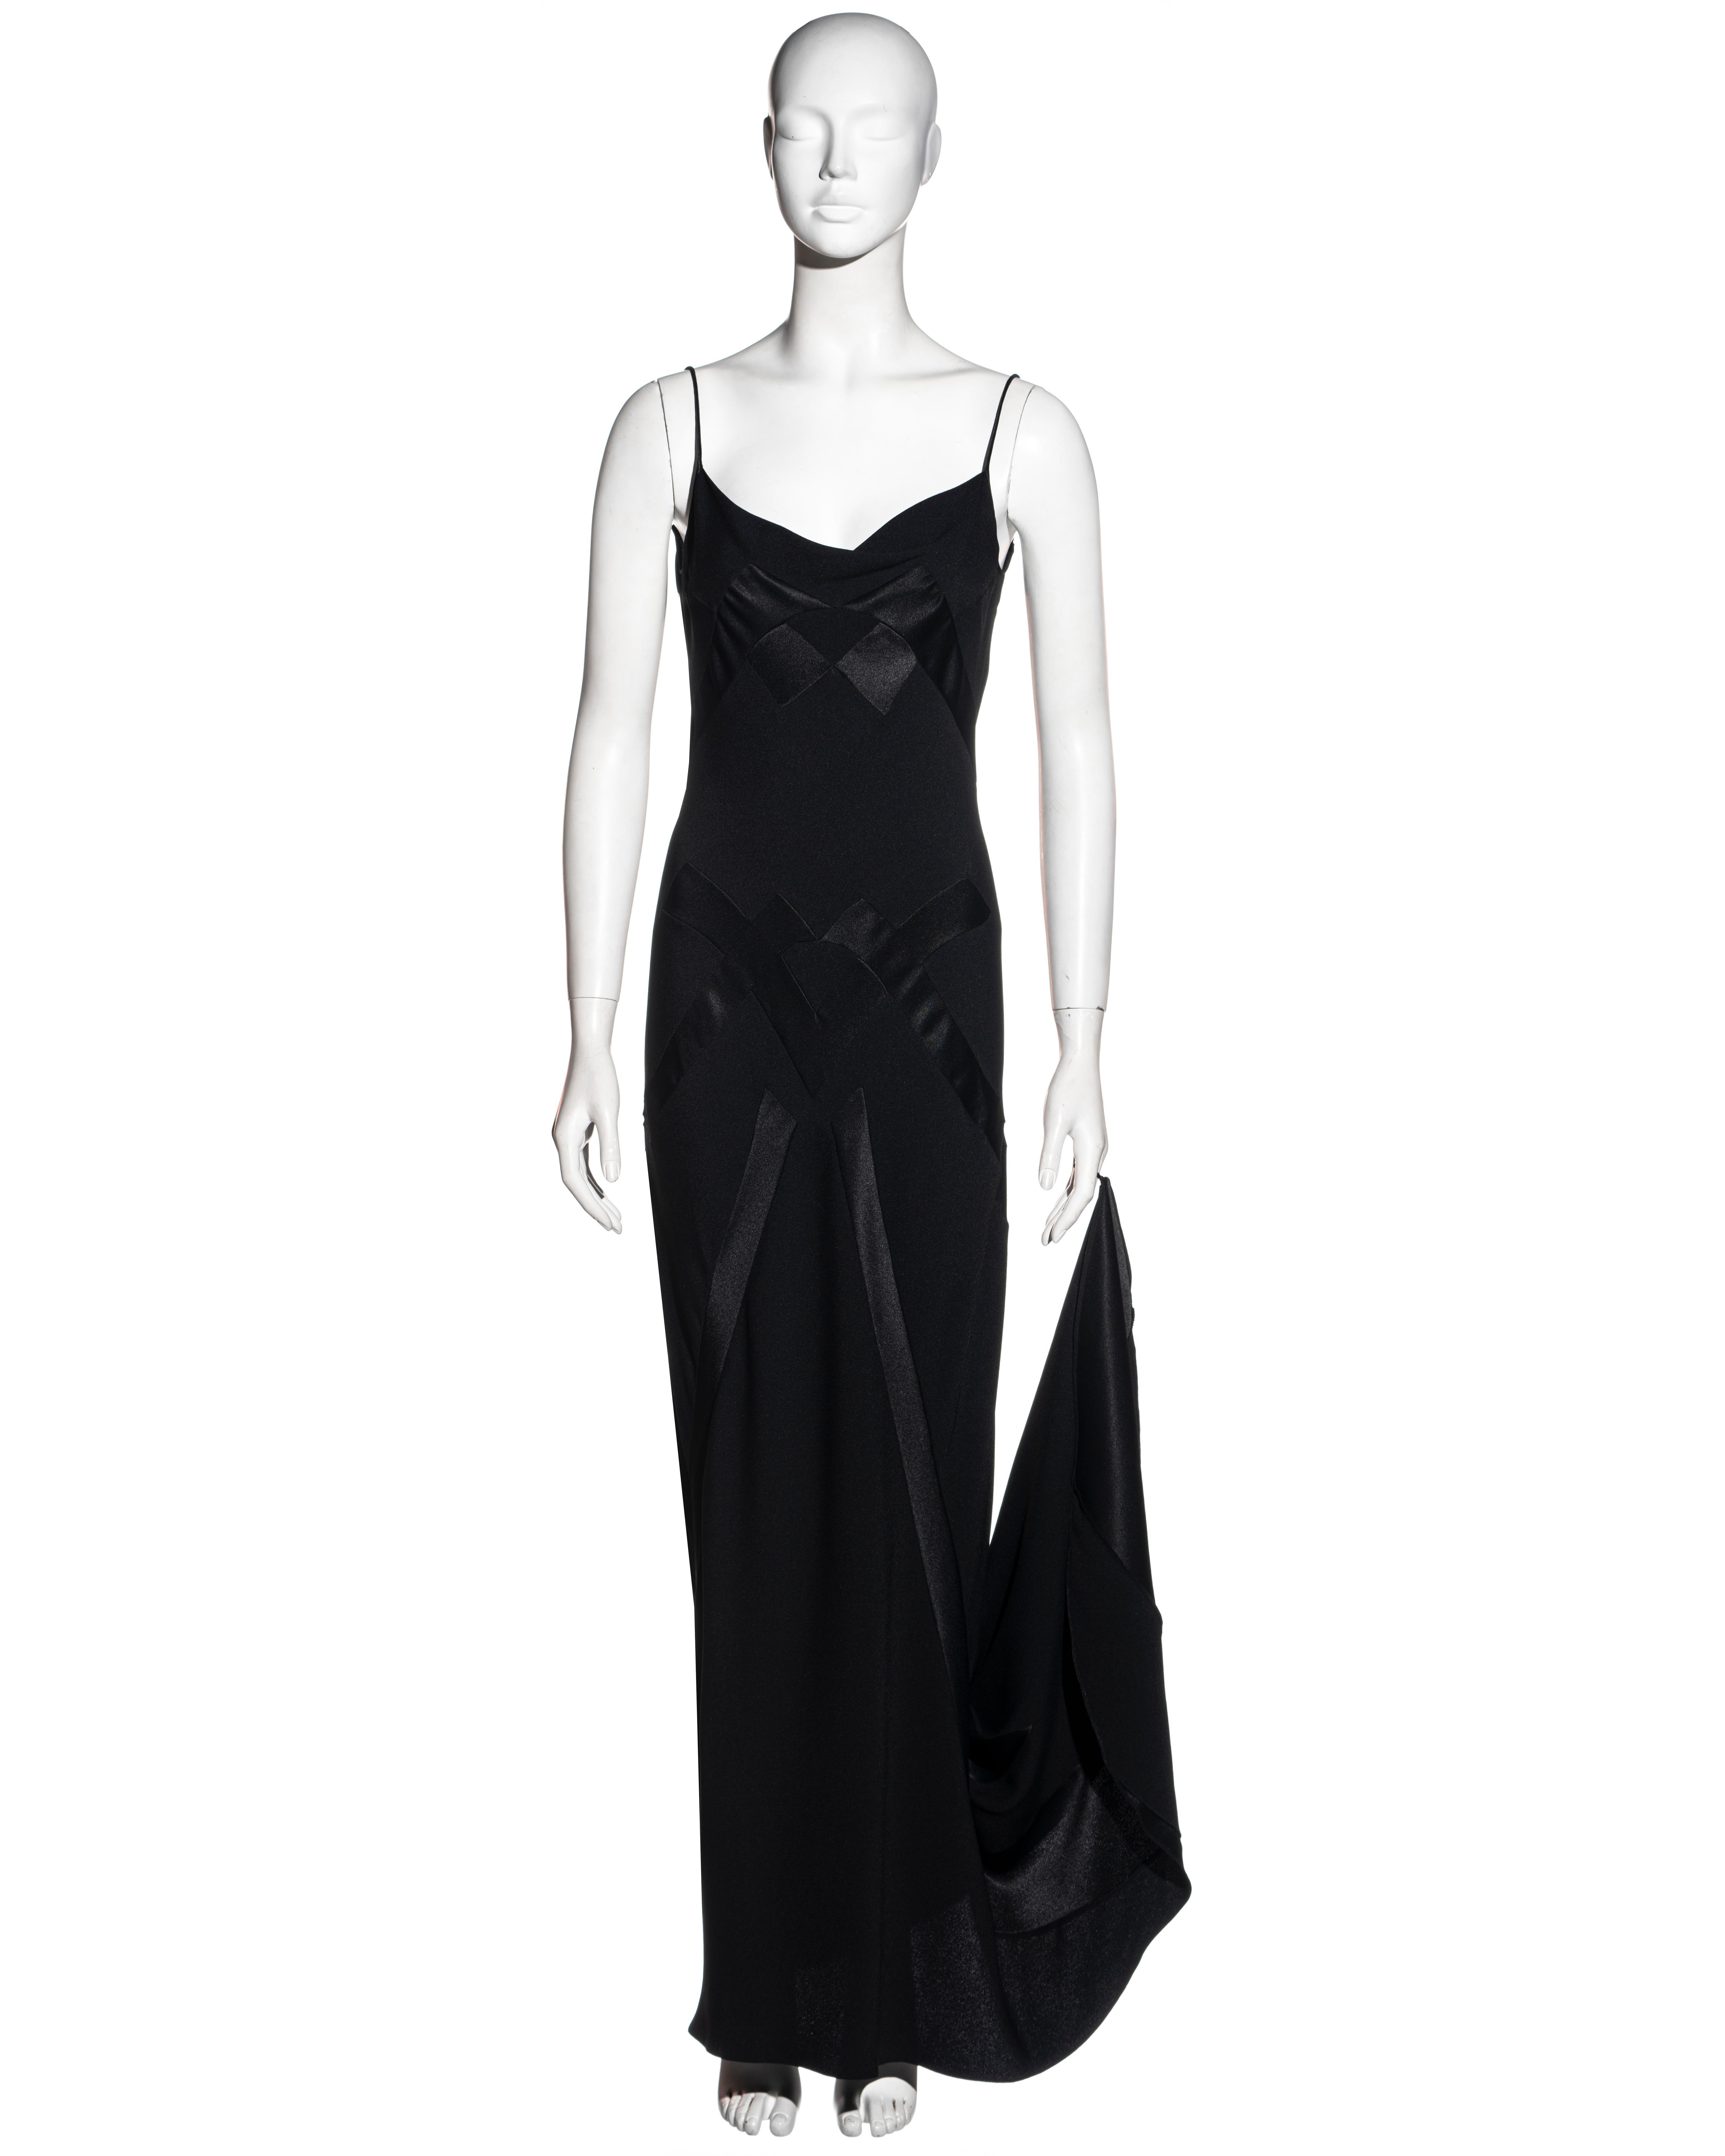 ▪ John Galliano satin backed crepe evening slip dress
▪ Spaghetti straps
▪ Cowl neckline 
▪ Trained skirt with dancing loop 
▪ Multiple satin panels form a geometric pattern
▪ 80% Acetate, 20% Viscose
▪ FR 40 - UK 12 - US 8
▪ Spring-Summer 1995